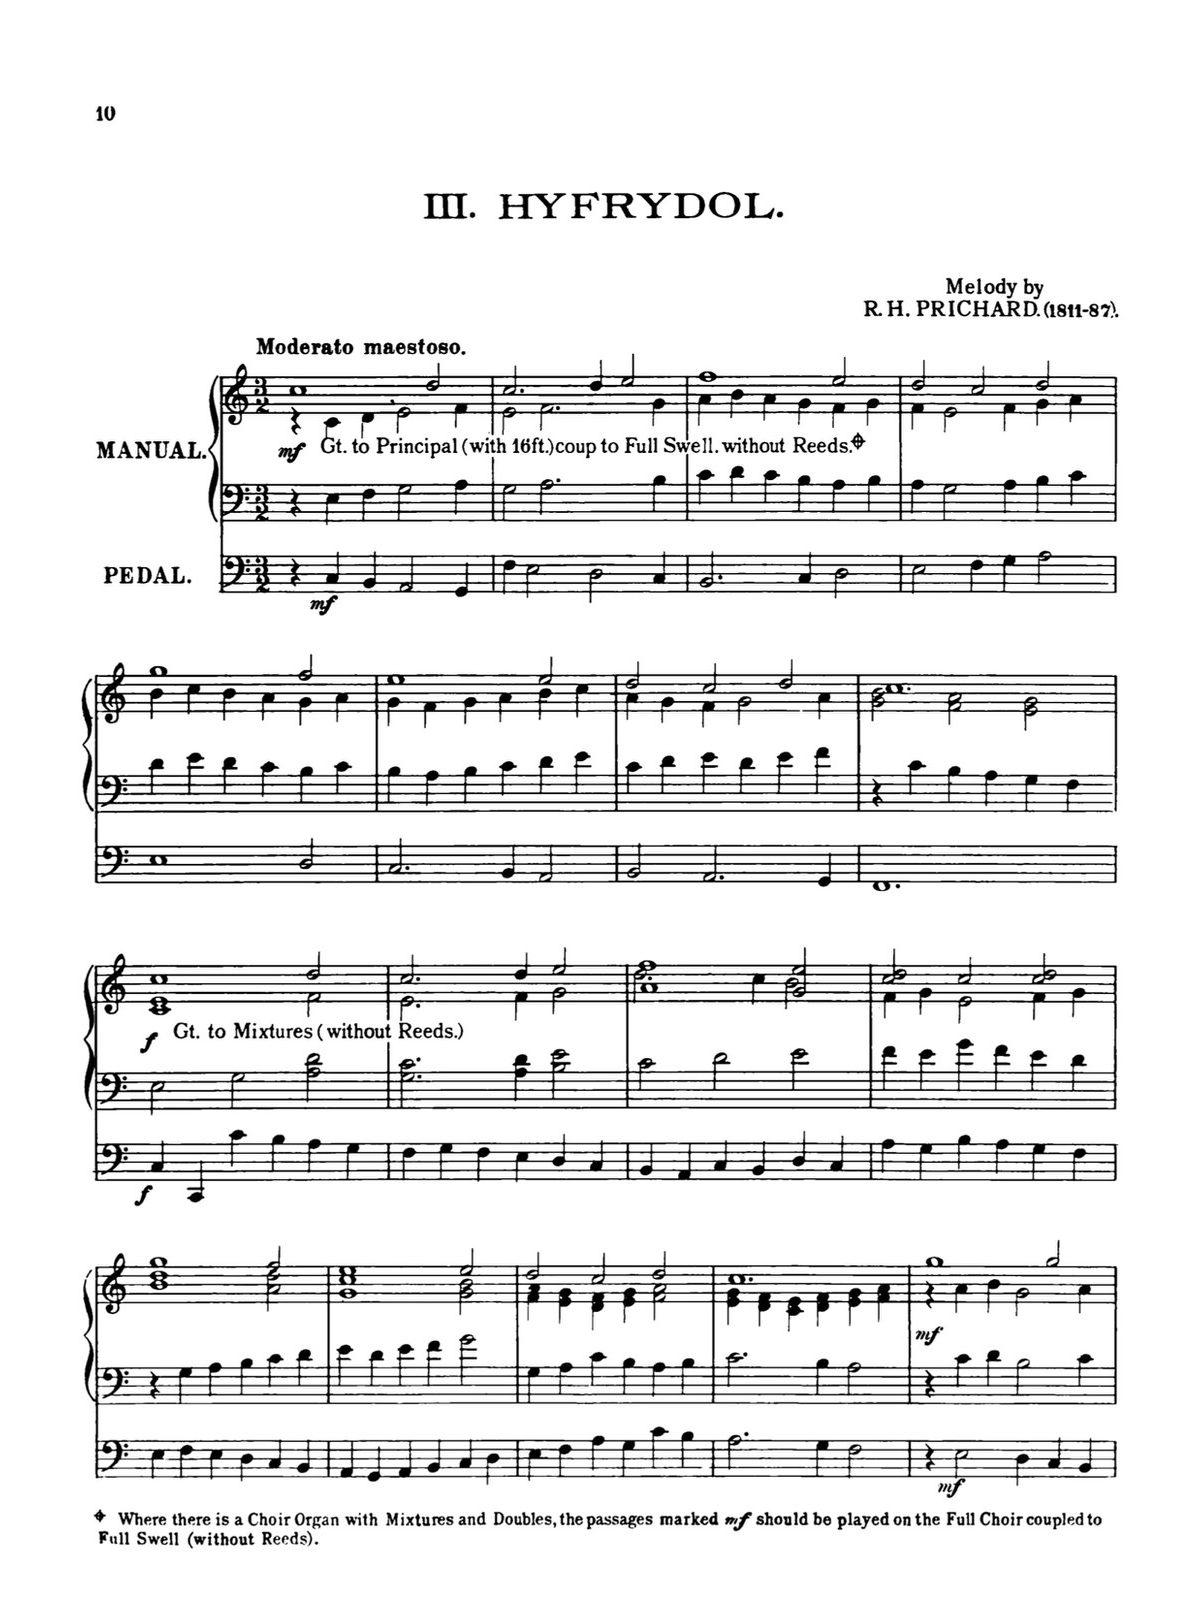 Vaughan Williams, 3 Preludes Founded on Welsh Hymn Tunes (for organ)-p10